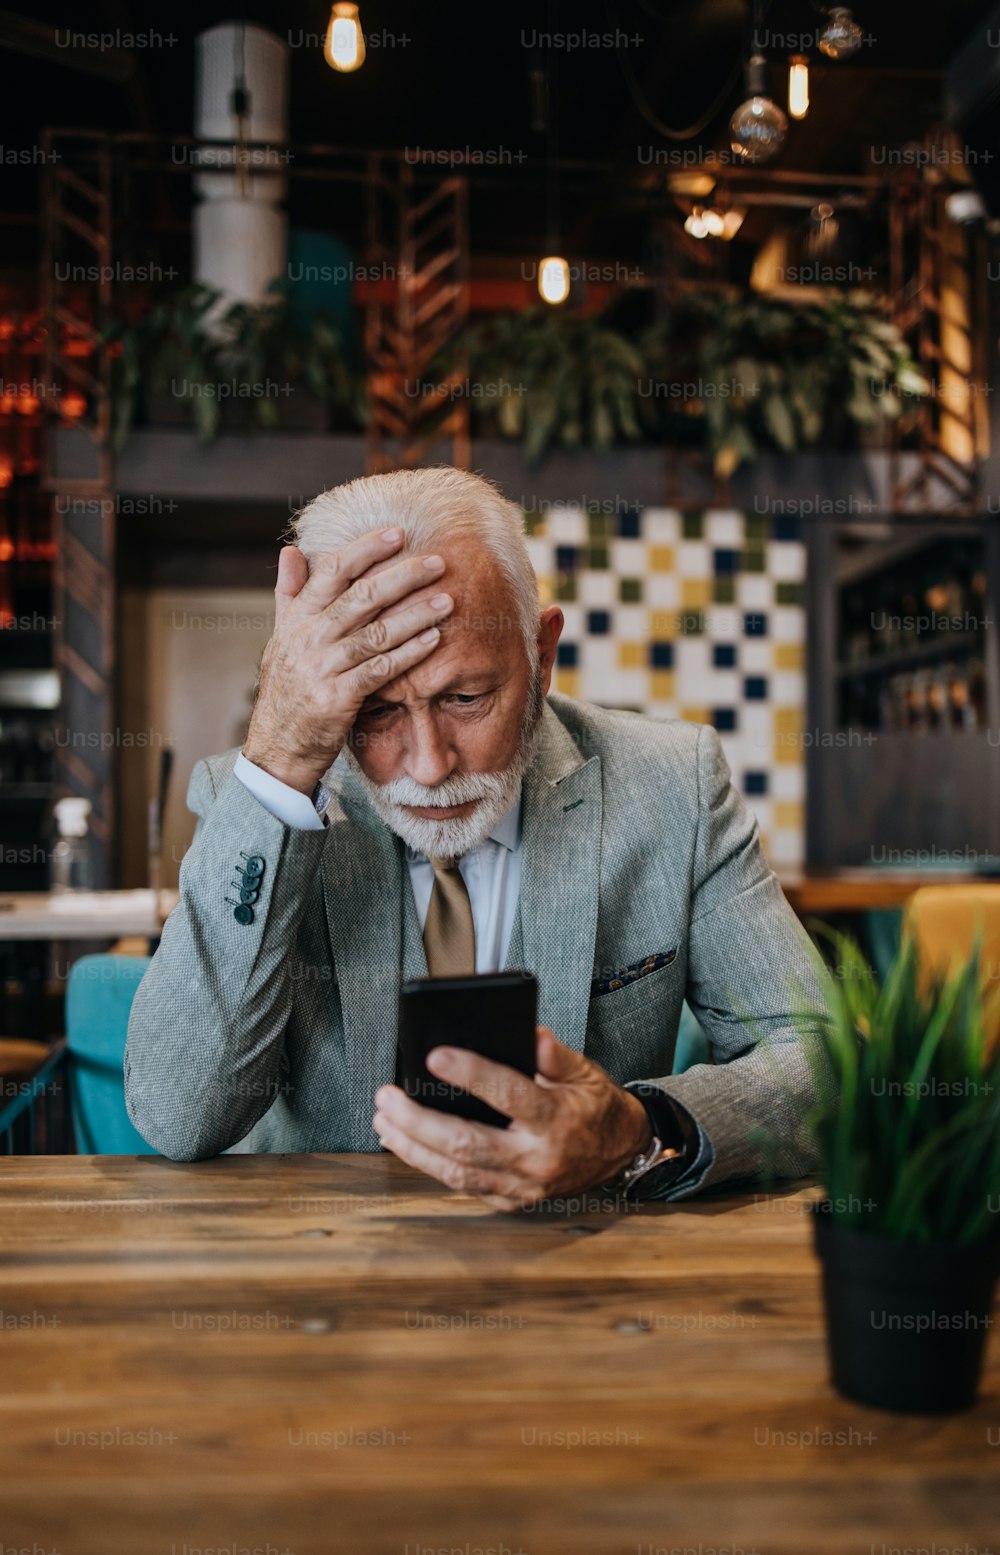 Happy and handsome senior businessman sitting in restaurant and waiting for lunch. He is using smart phone and talking with someone. Business seniors lifestyle concept.